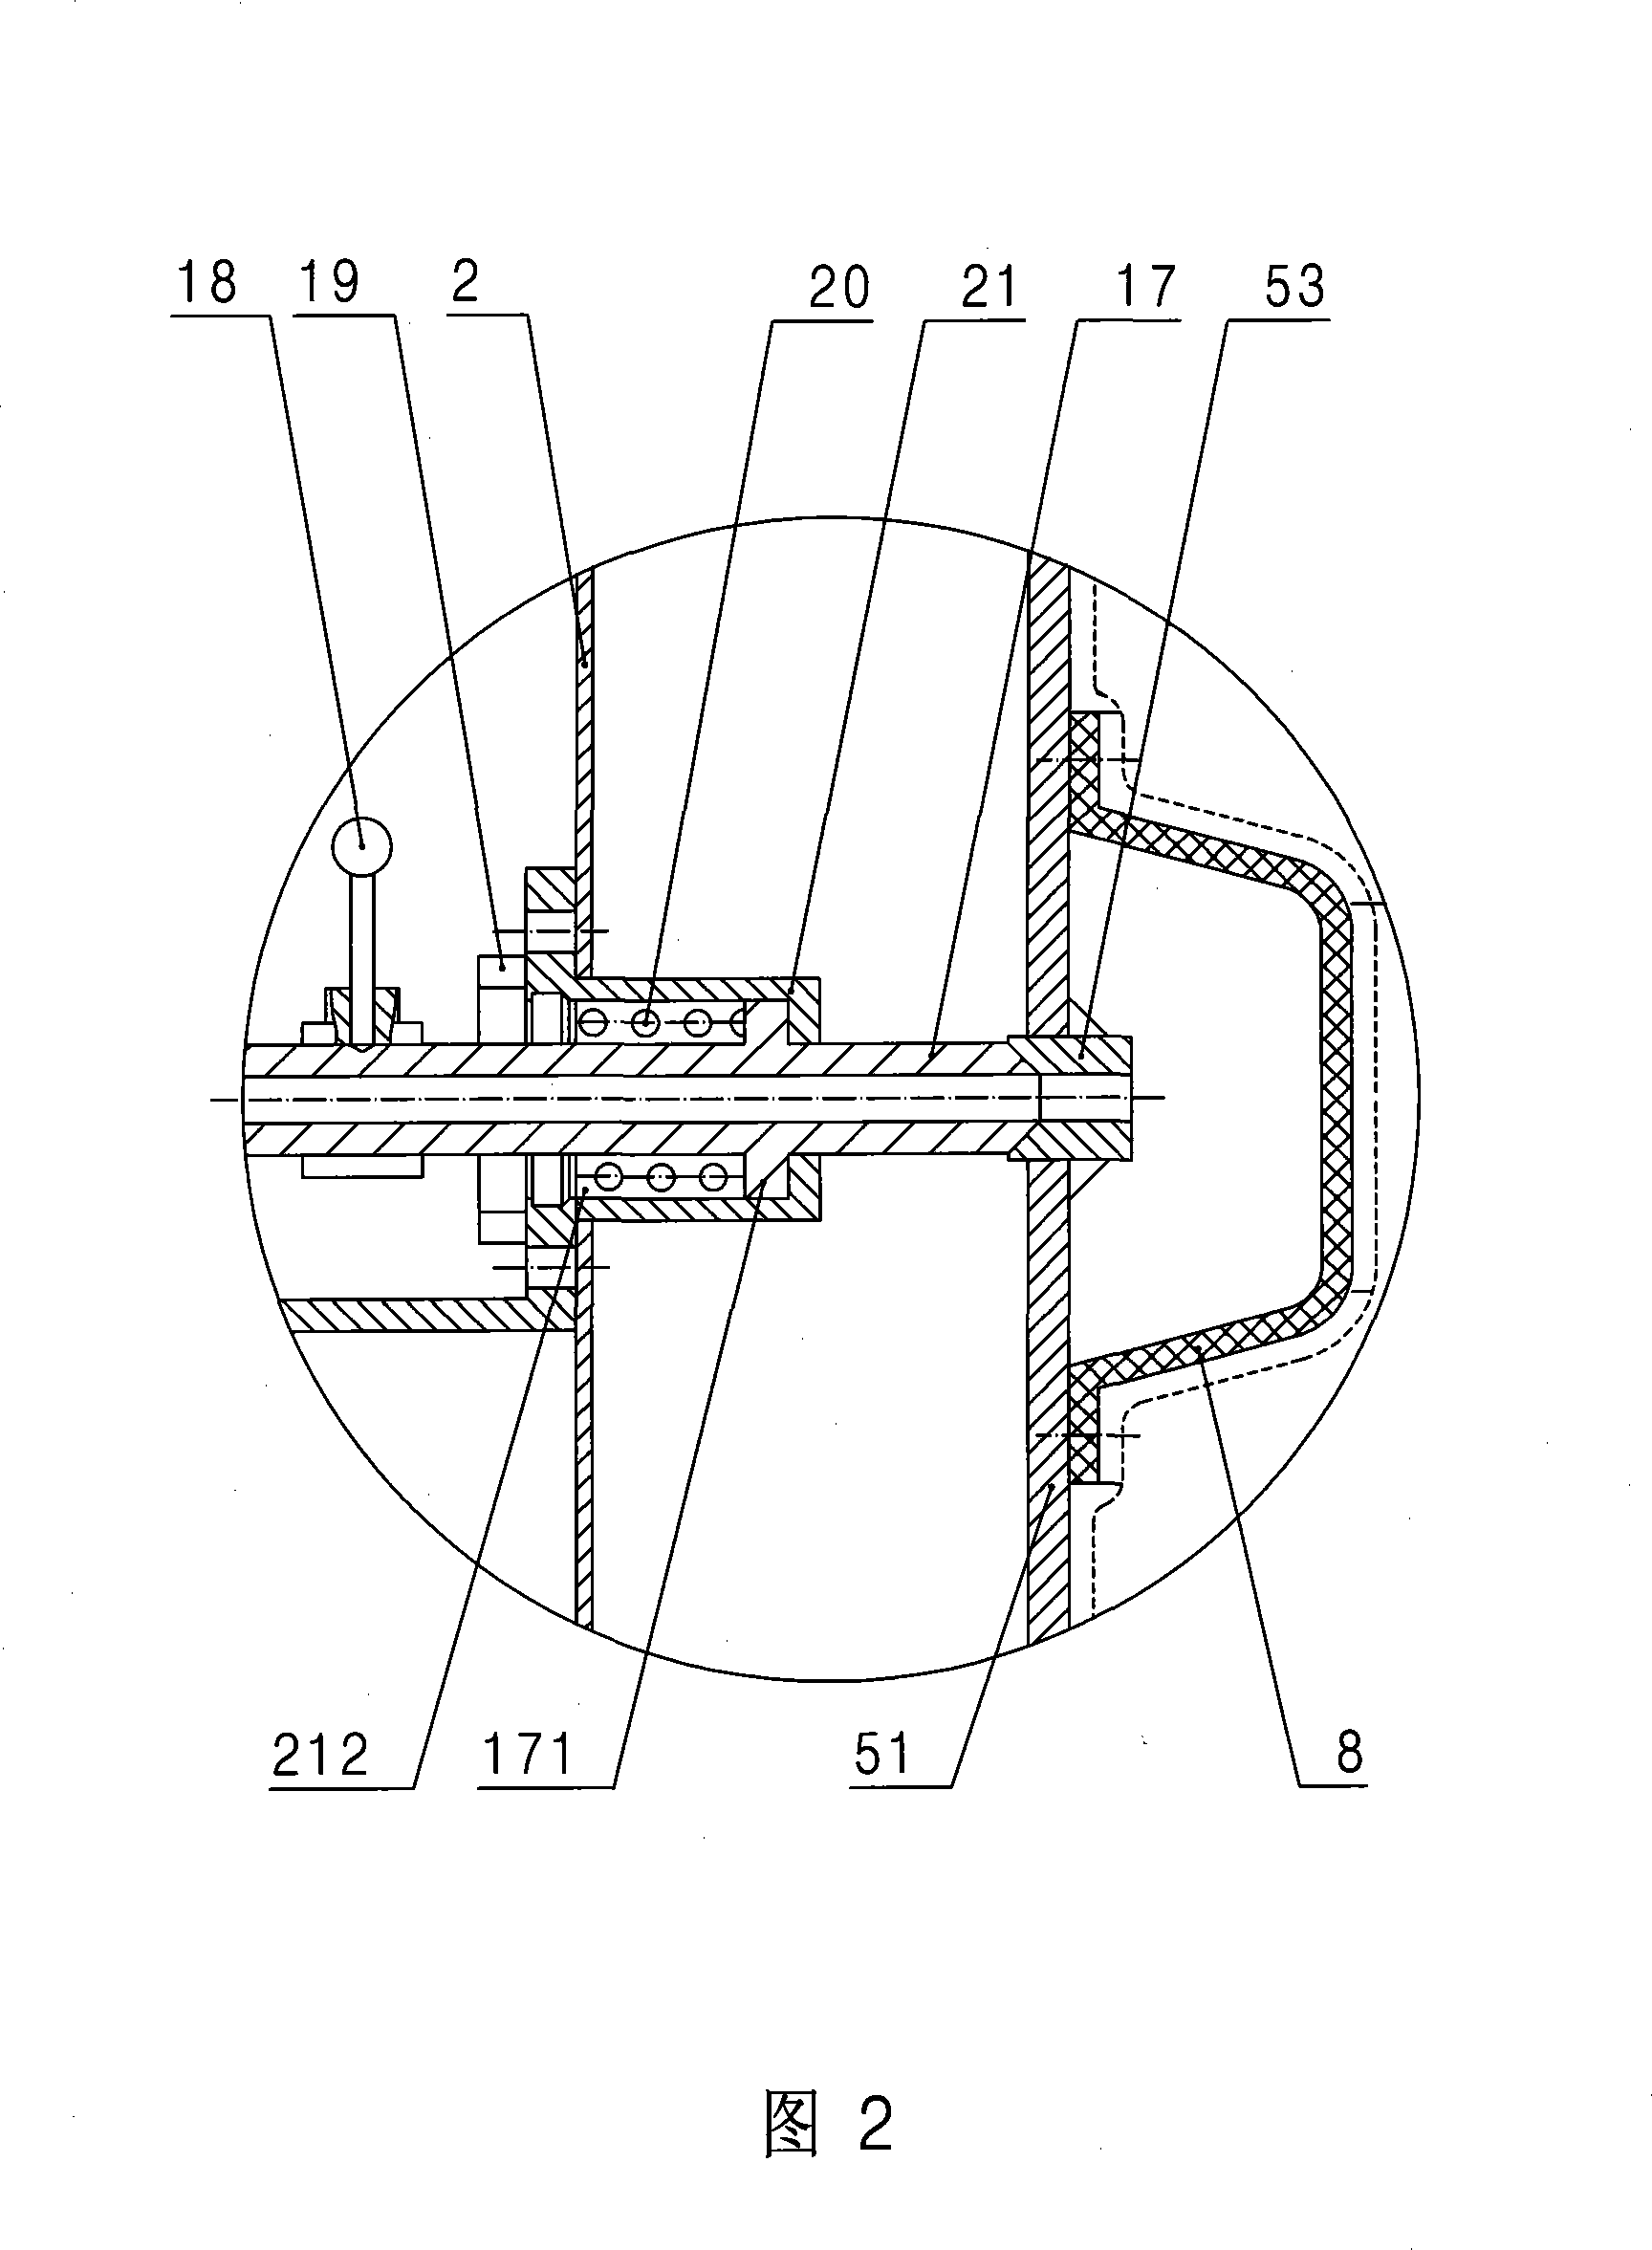 Bag extrusion device of the hanging bag type centrifugal machine